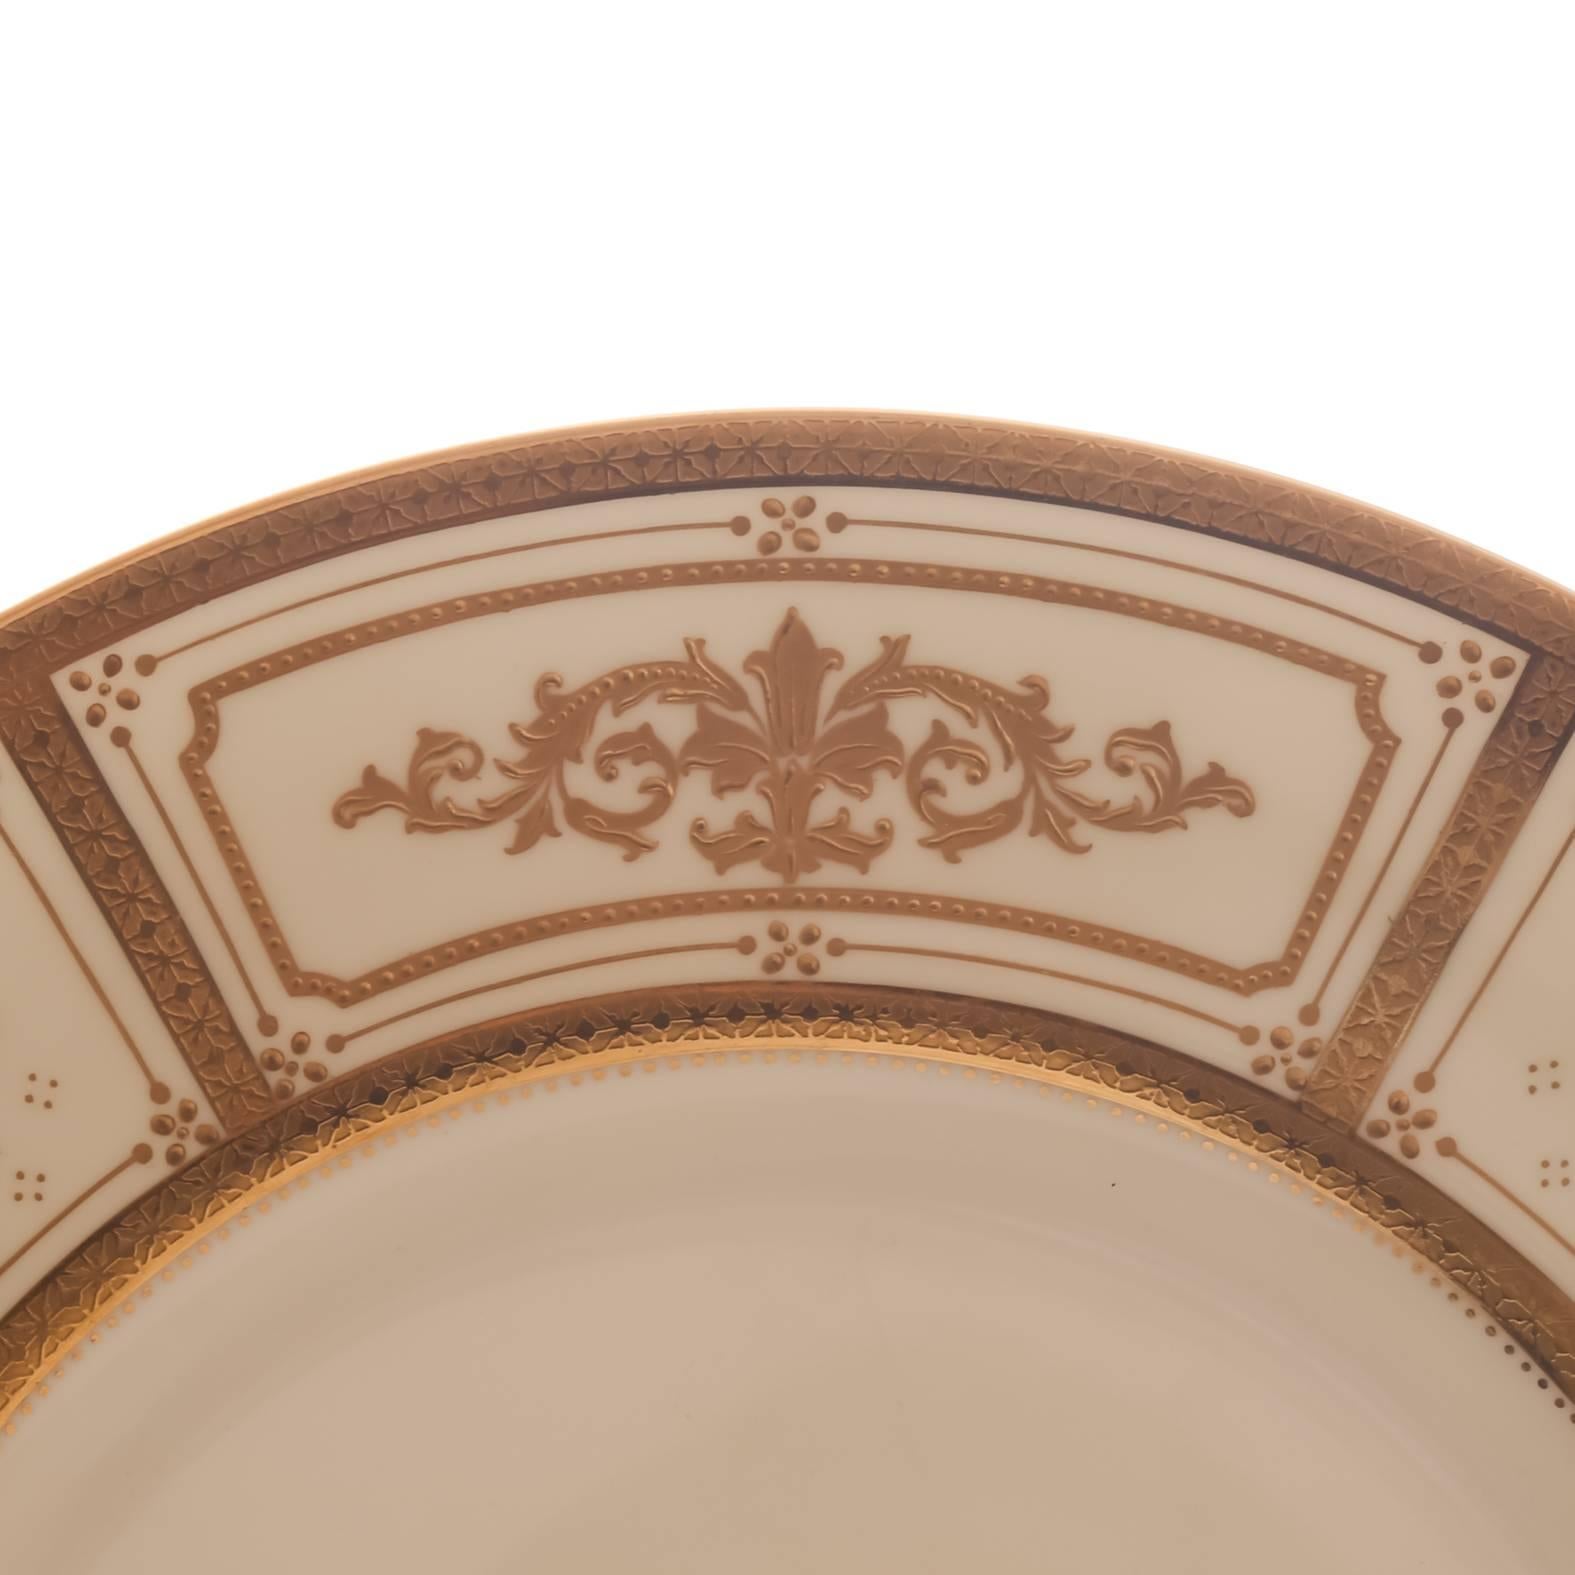 A finely detailed set by one of England's great porcelain manufacturers: Minton. An unique design of 24-karat acid etched gilt bands and panels with detailed and exquisite raised tooled gold in an Art Deco design. Custom ordered through the fine